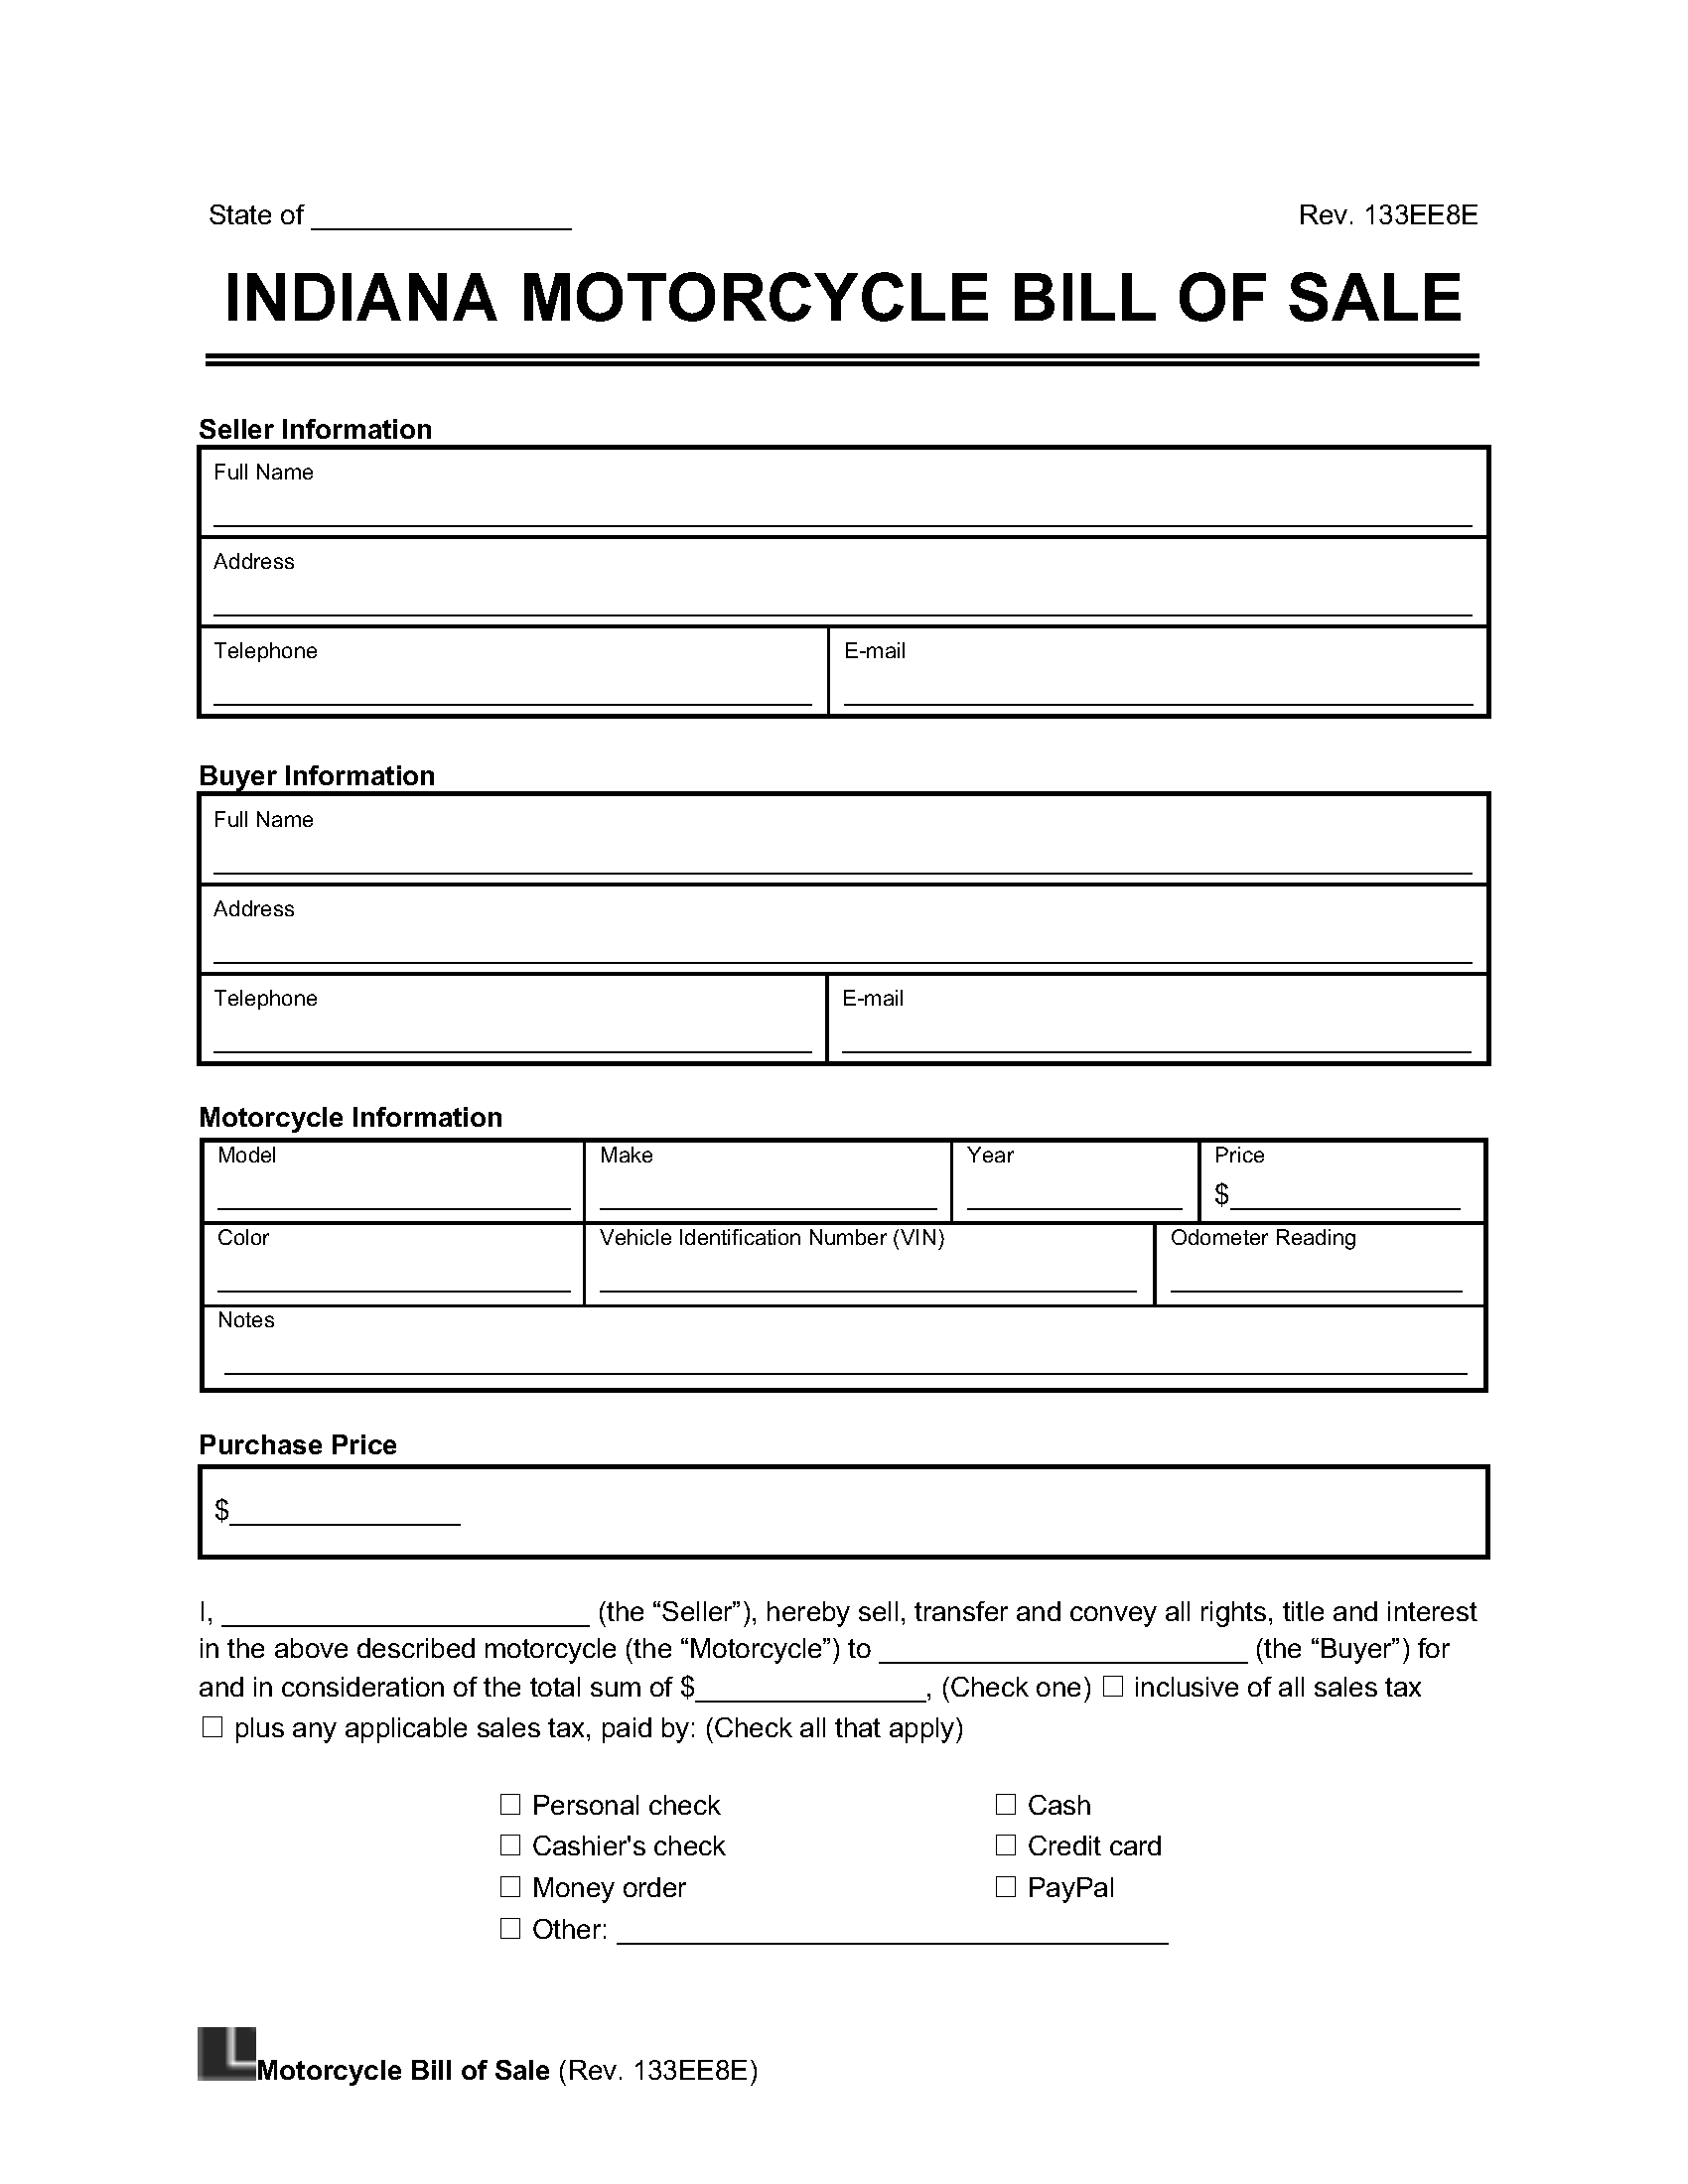 indiana motorcycle bill of sale